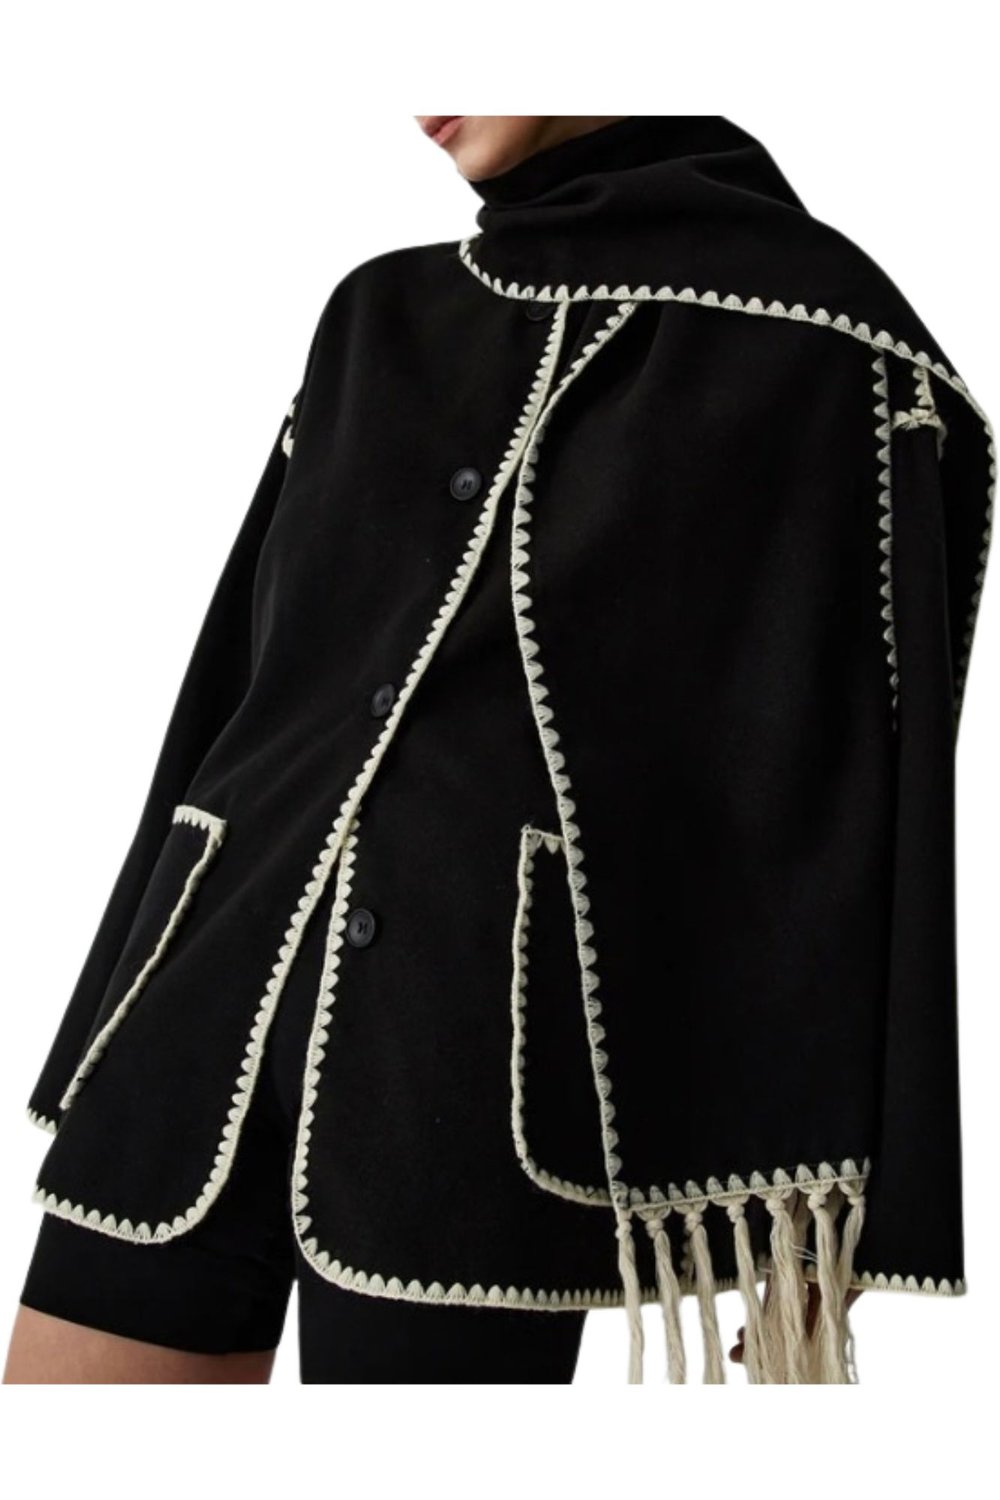  Farfetch  TOTEME Embroidered Scarf Jacket  $1,130 